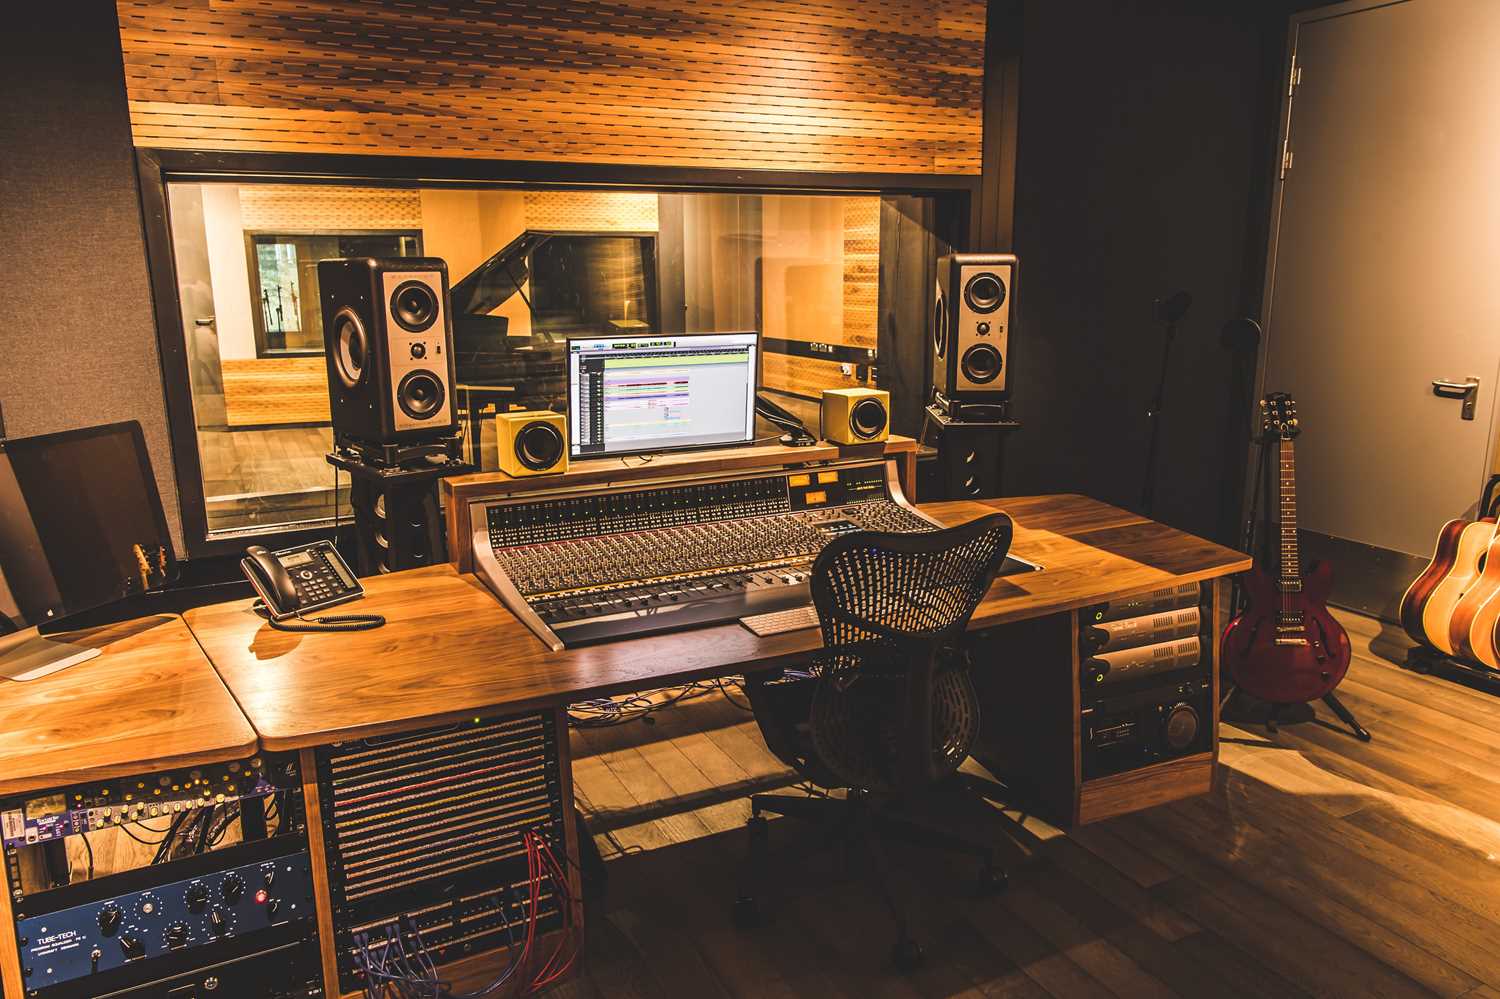 Lot 38 - ONE TO ONE MIXING MASTERCLASS AT UNIVERSAL MUSIC STUDIOS, LONDON